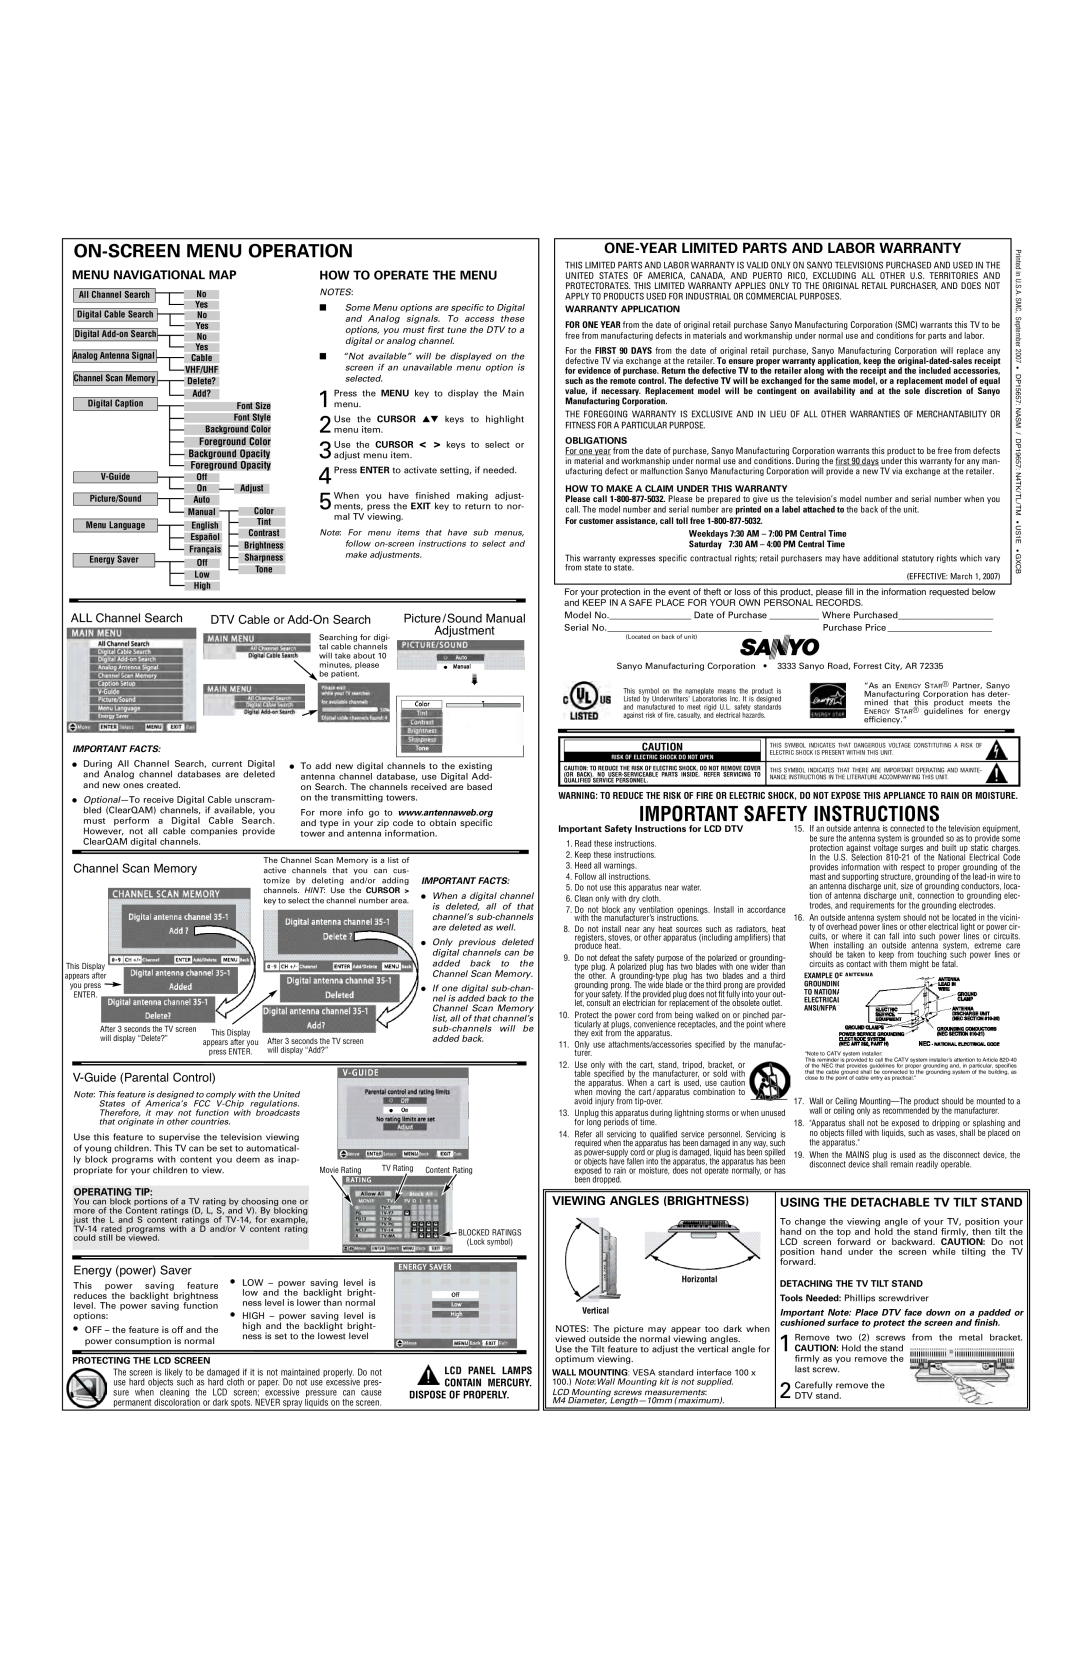 Sanyo DP15657 One-Year Limited Parts And Labor Warranty, Menu Navigational Map, How To Operate The Menu, Important Facts 